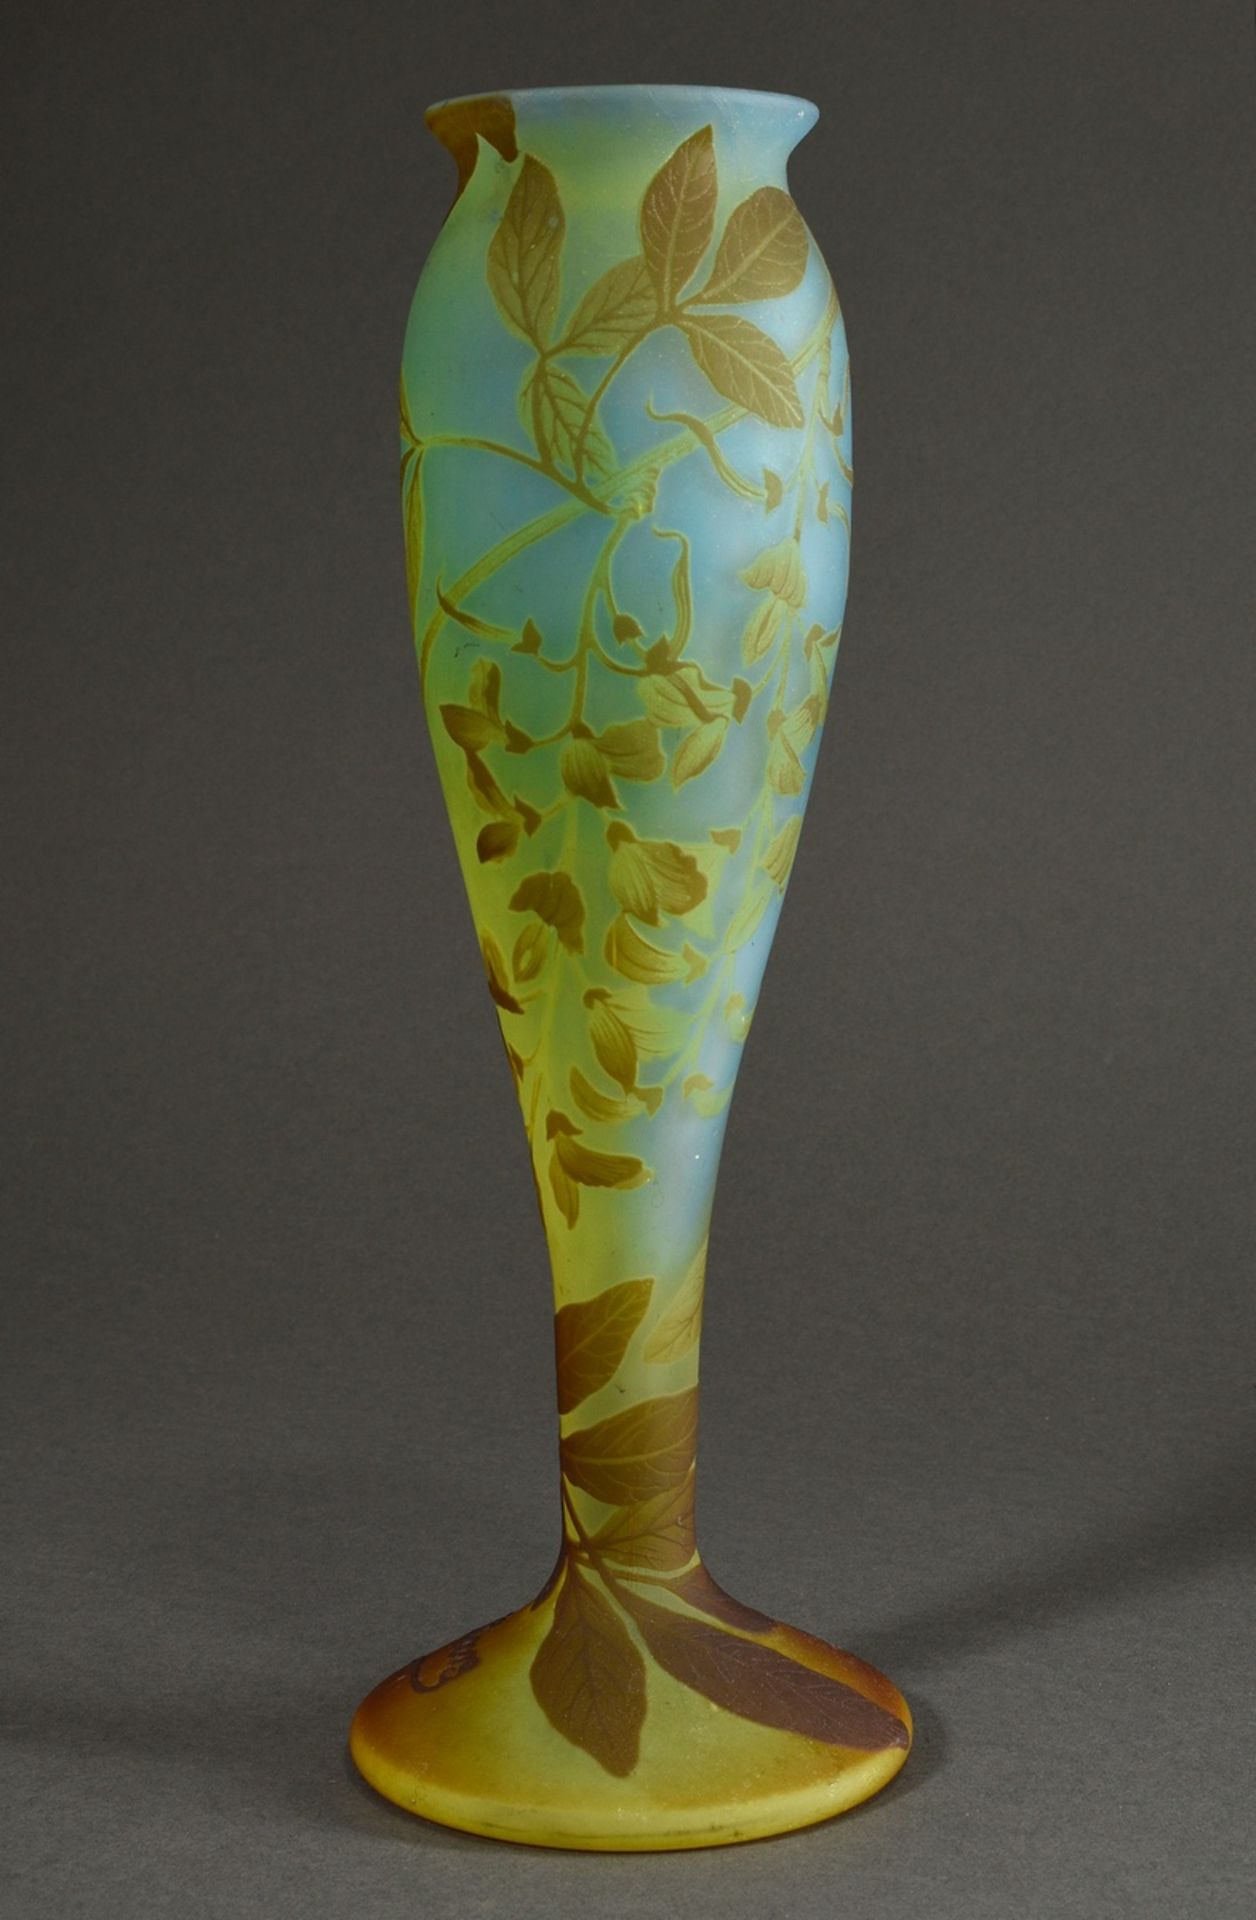 Barz Art Nouveau vase "Wysteria" in blue-green-brown flashed glass, slender baluster shape on a bro